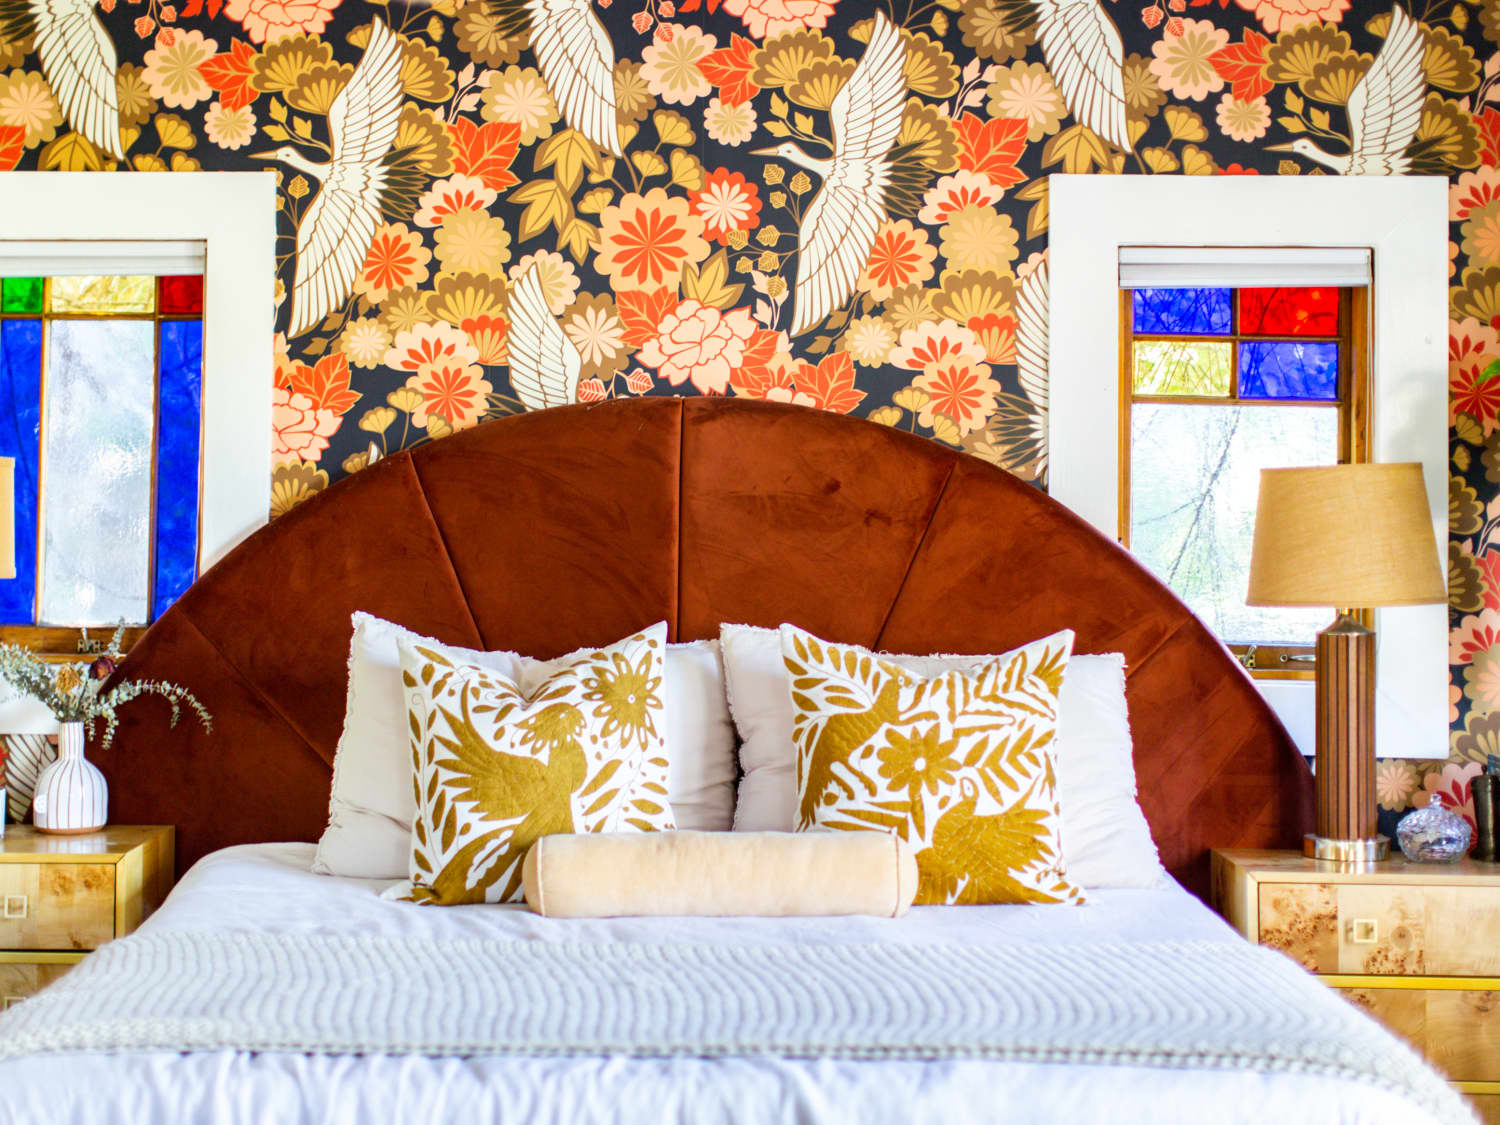 Can You Paint Over Wallpaper? Here's What the Experts Say